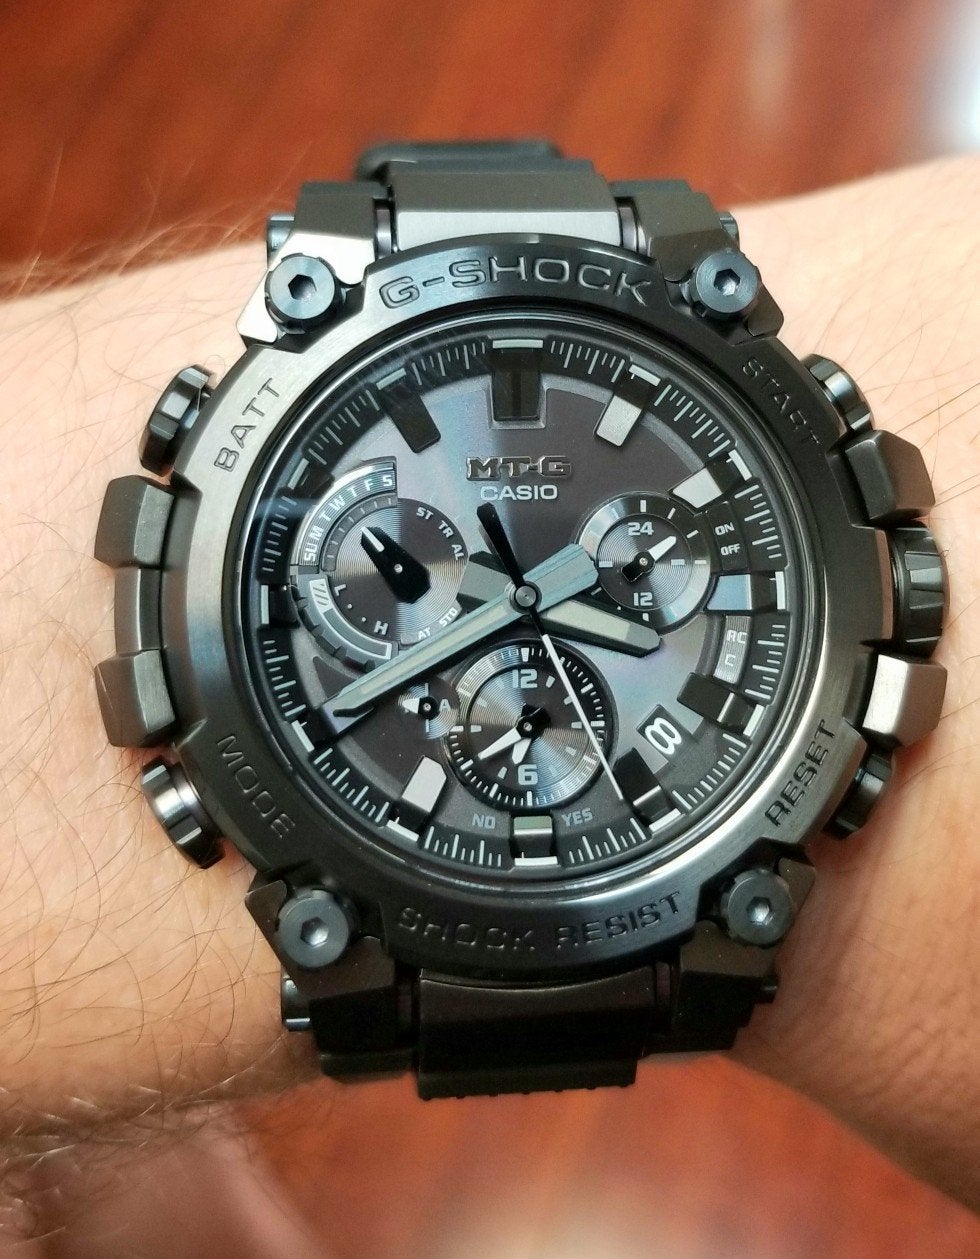 New MTG-B3000B-1AJF. Awesome, but do I have an issue? | WatchUSeek